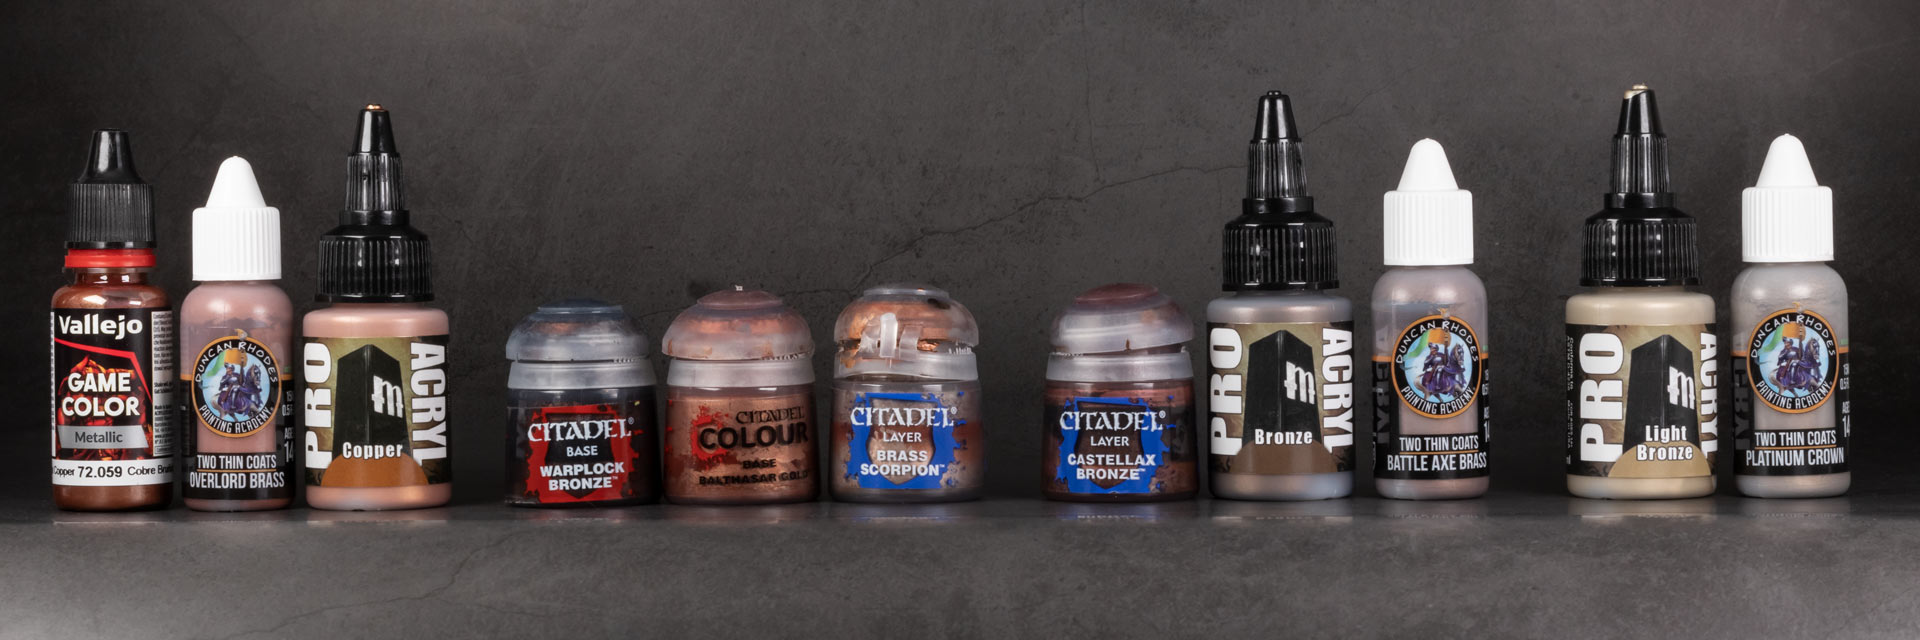 The best copper, bronze, and brass metallic paints for painting Warhammer miniatures selected by Stahly